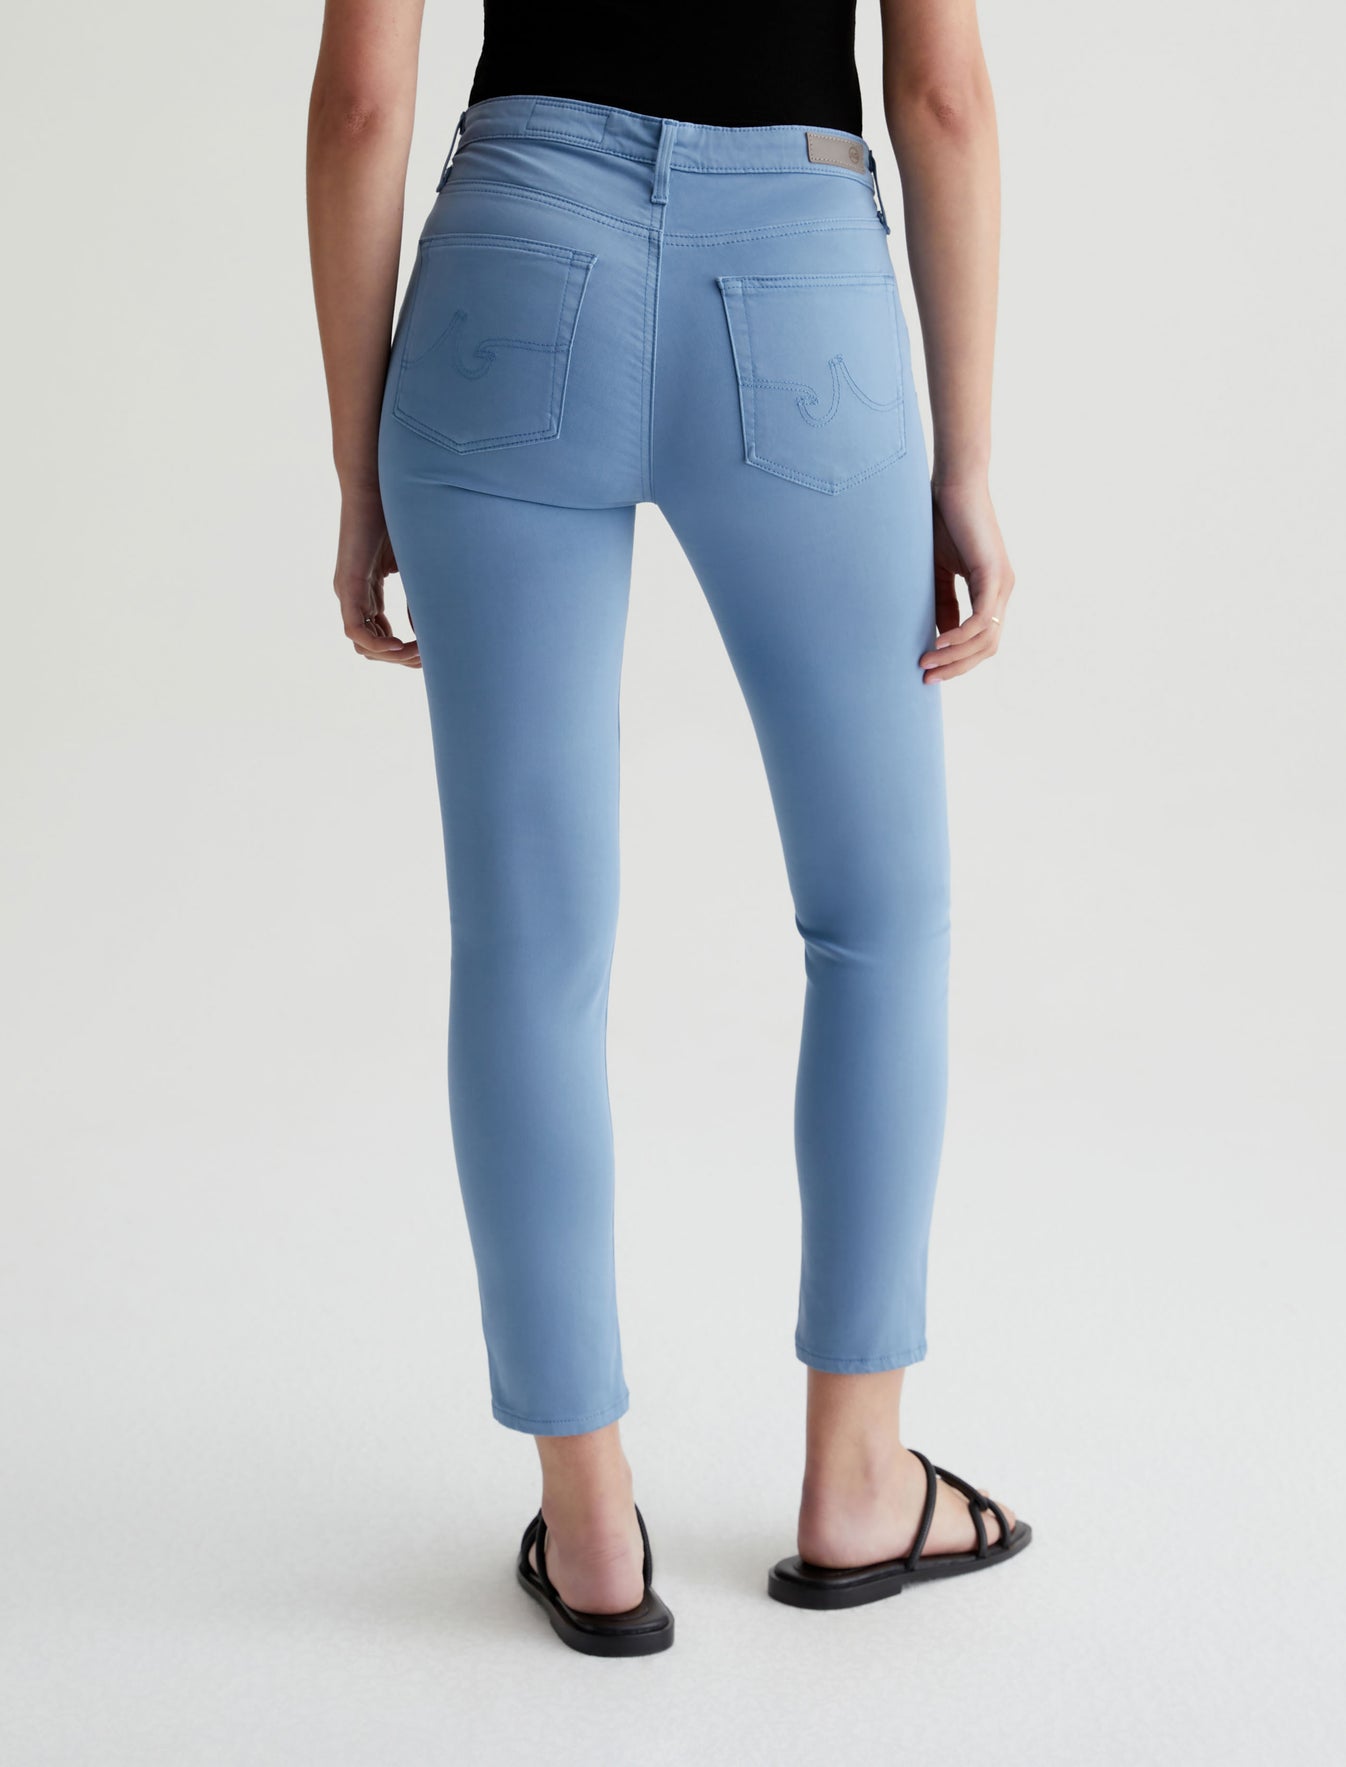 Slim Mid Rise Women Jeans Joggers, Waist Size: 28 to 30 at Rs 165